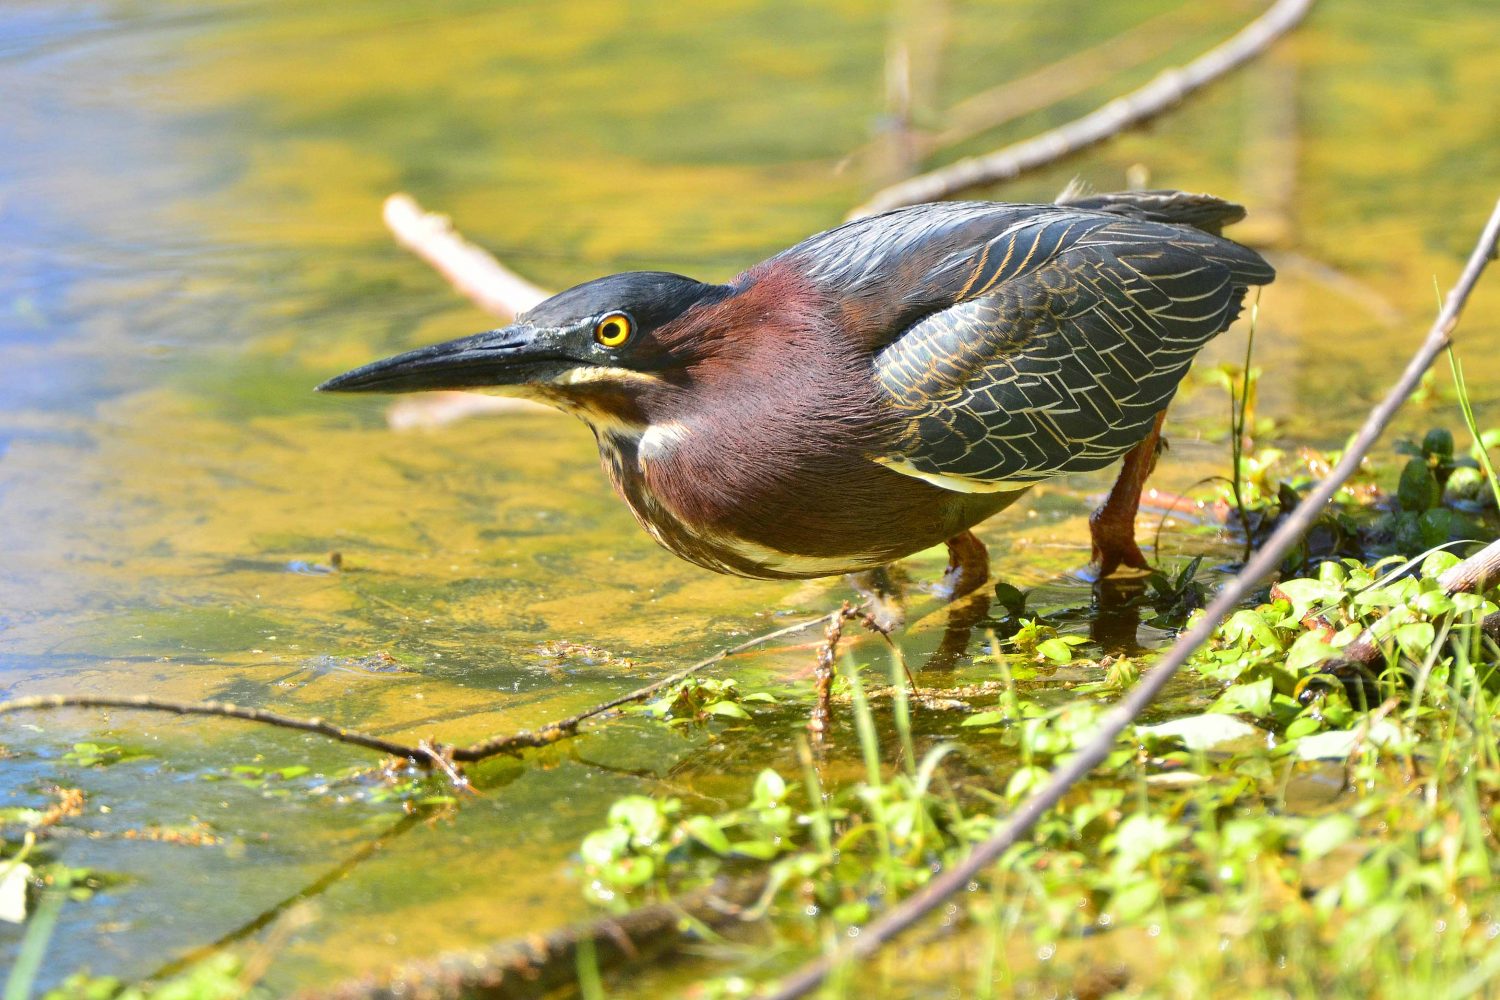 Green heron wading into algae-covered water.